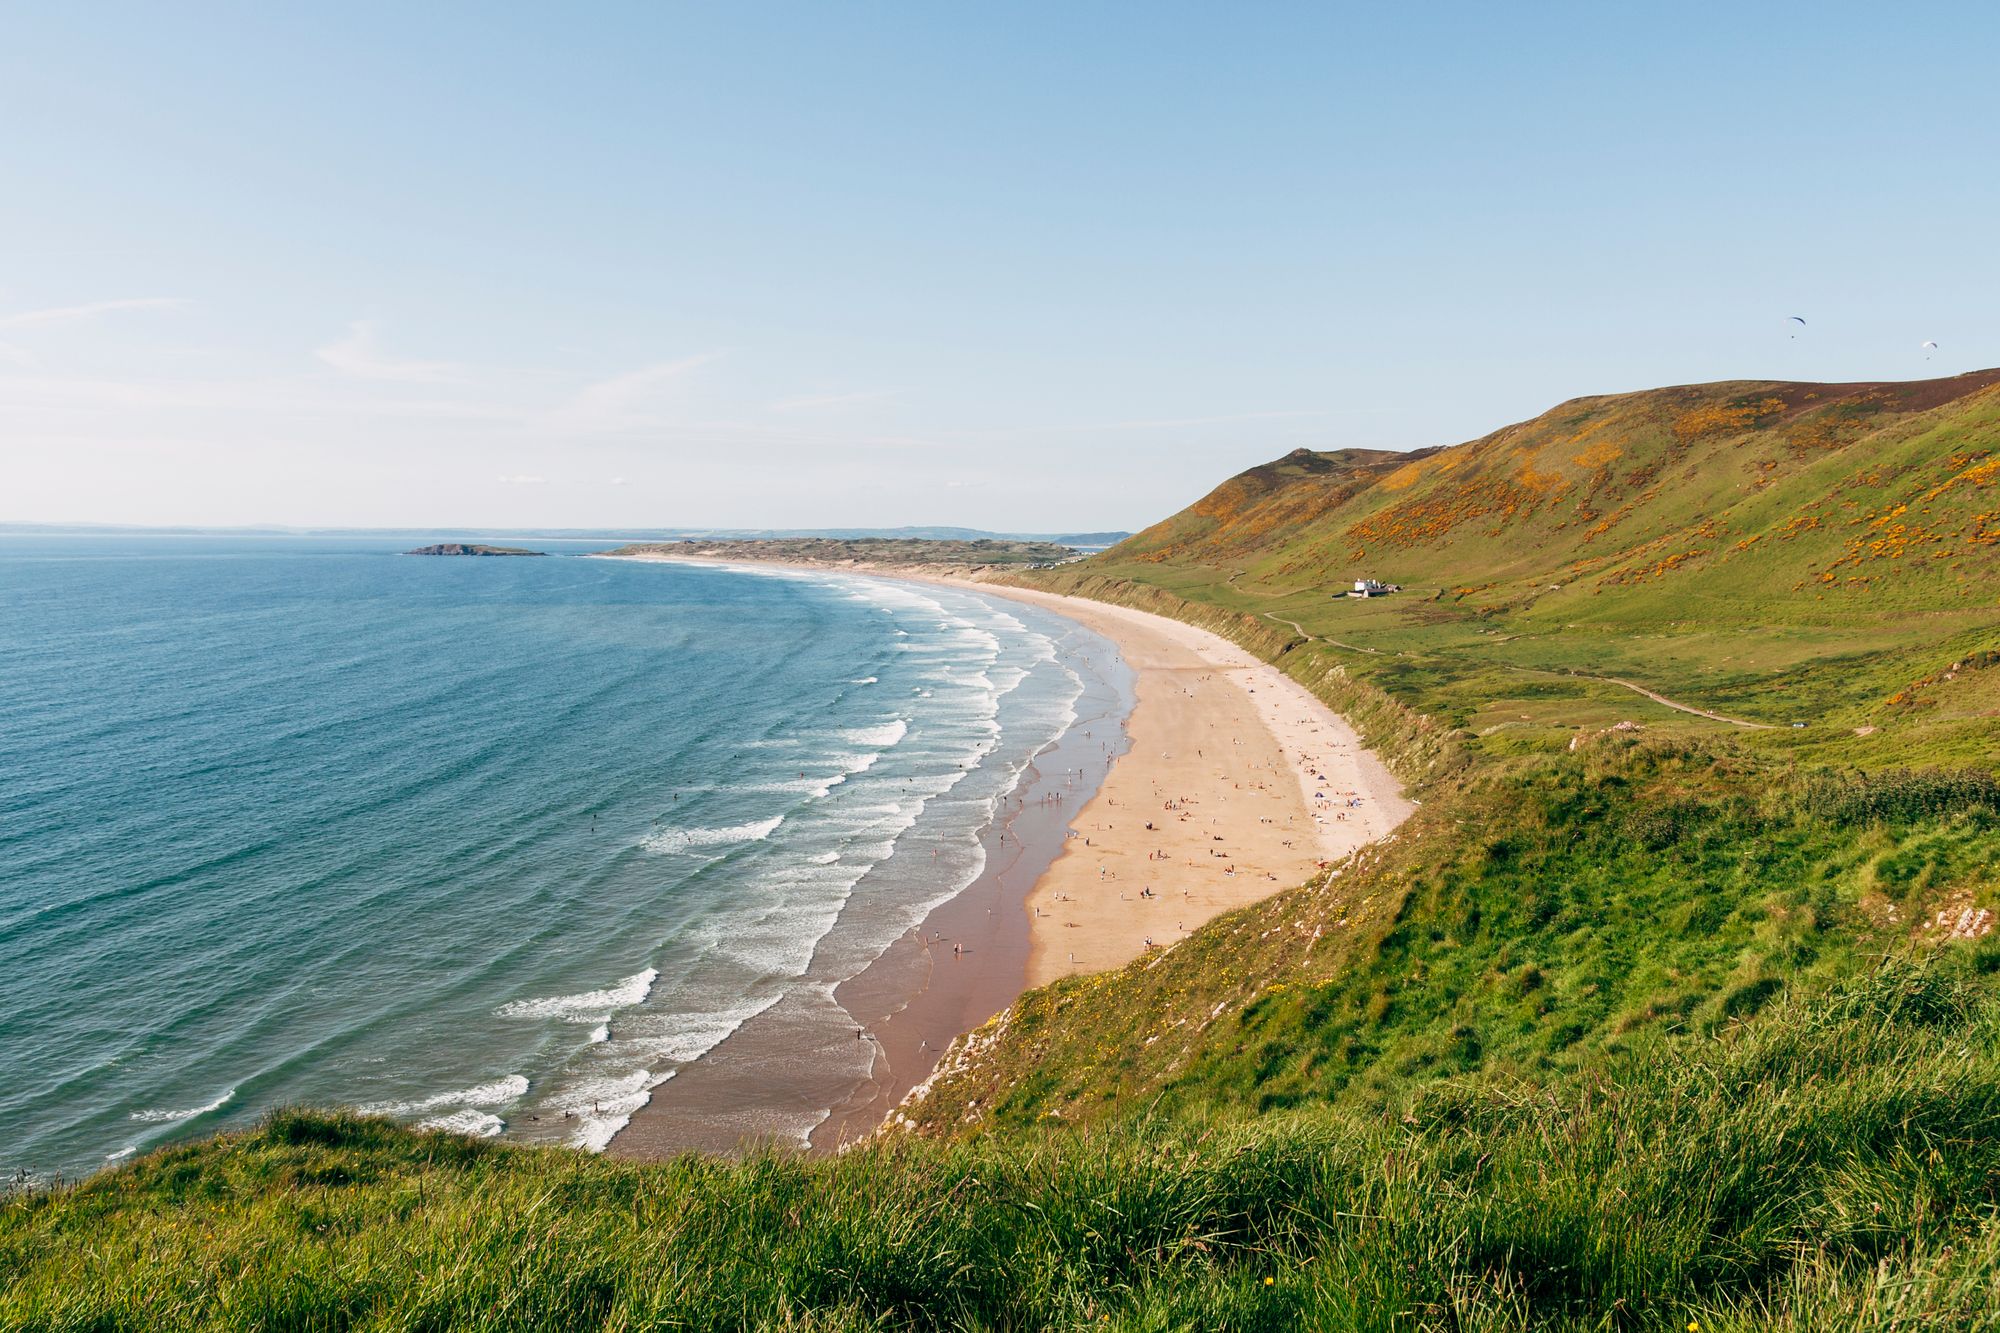 Rhossili Bay on the Gower Peninsula in Wales